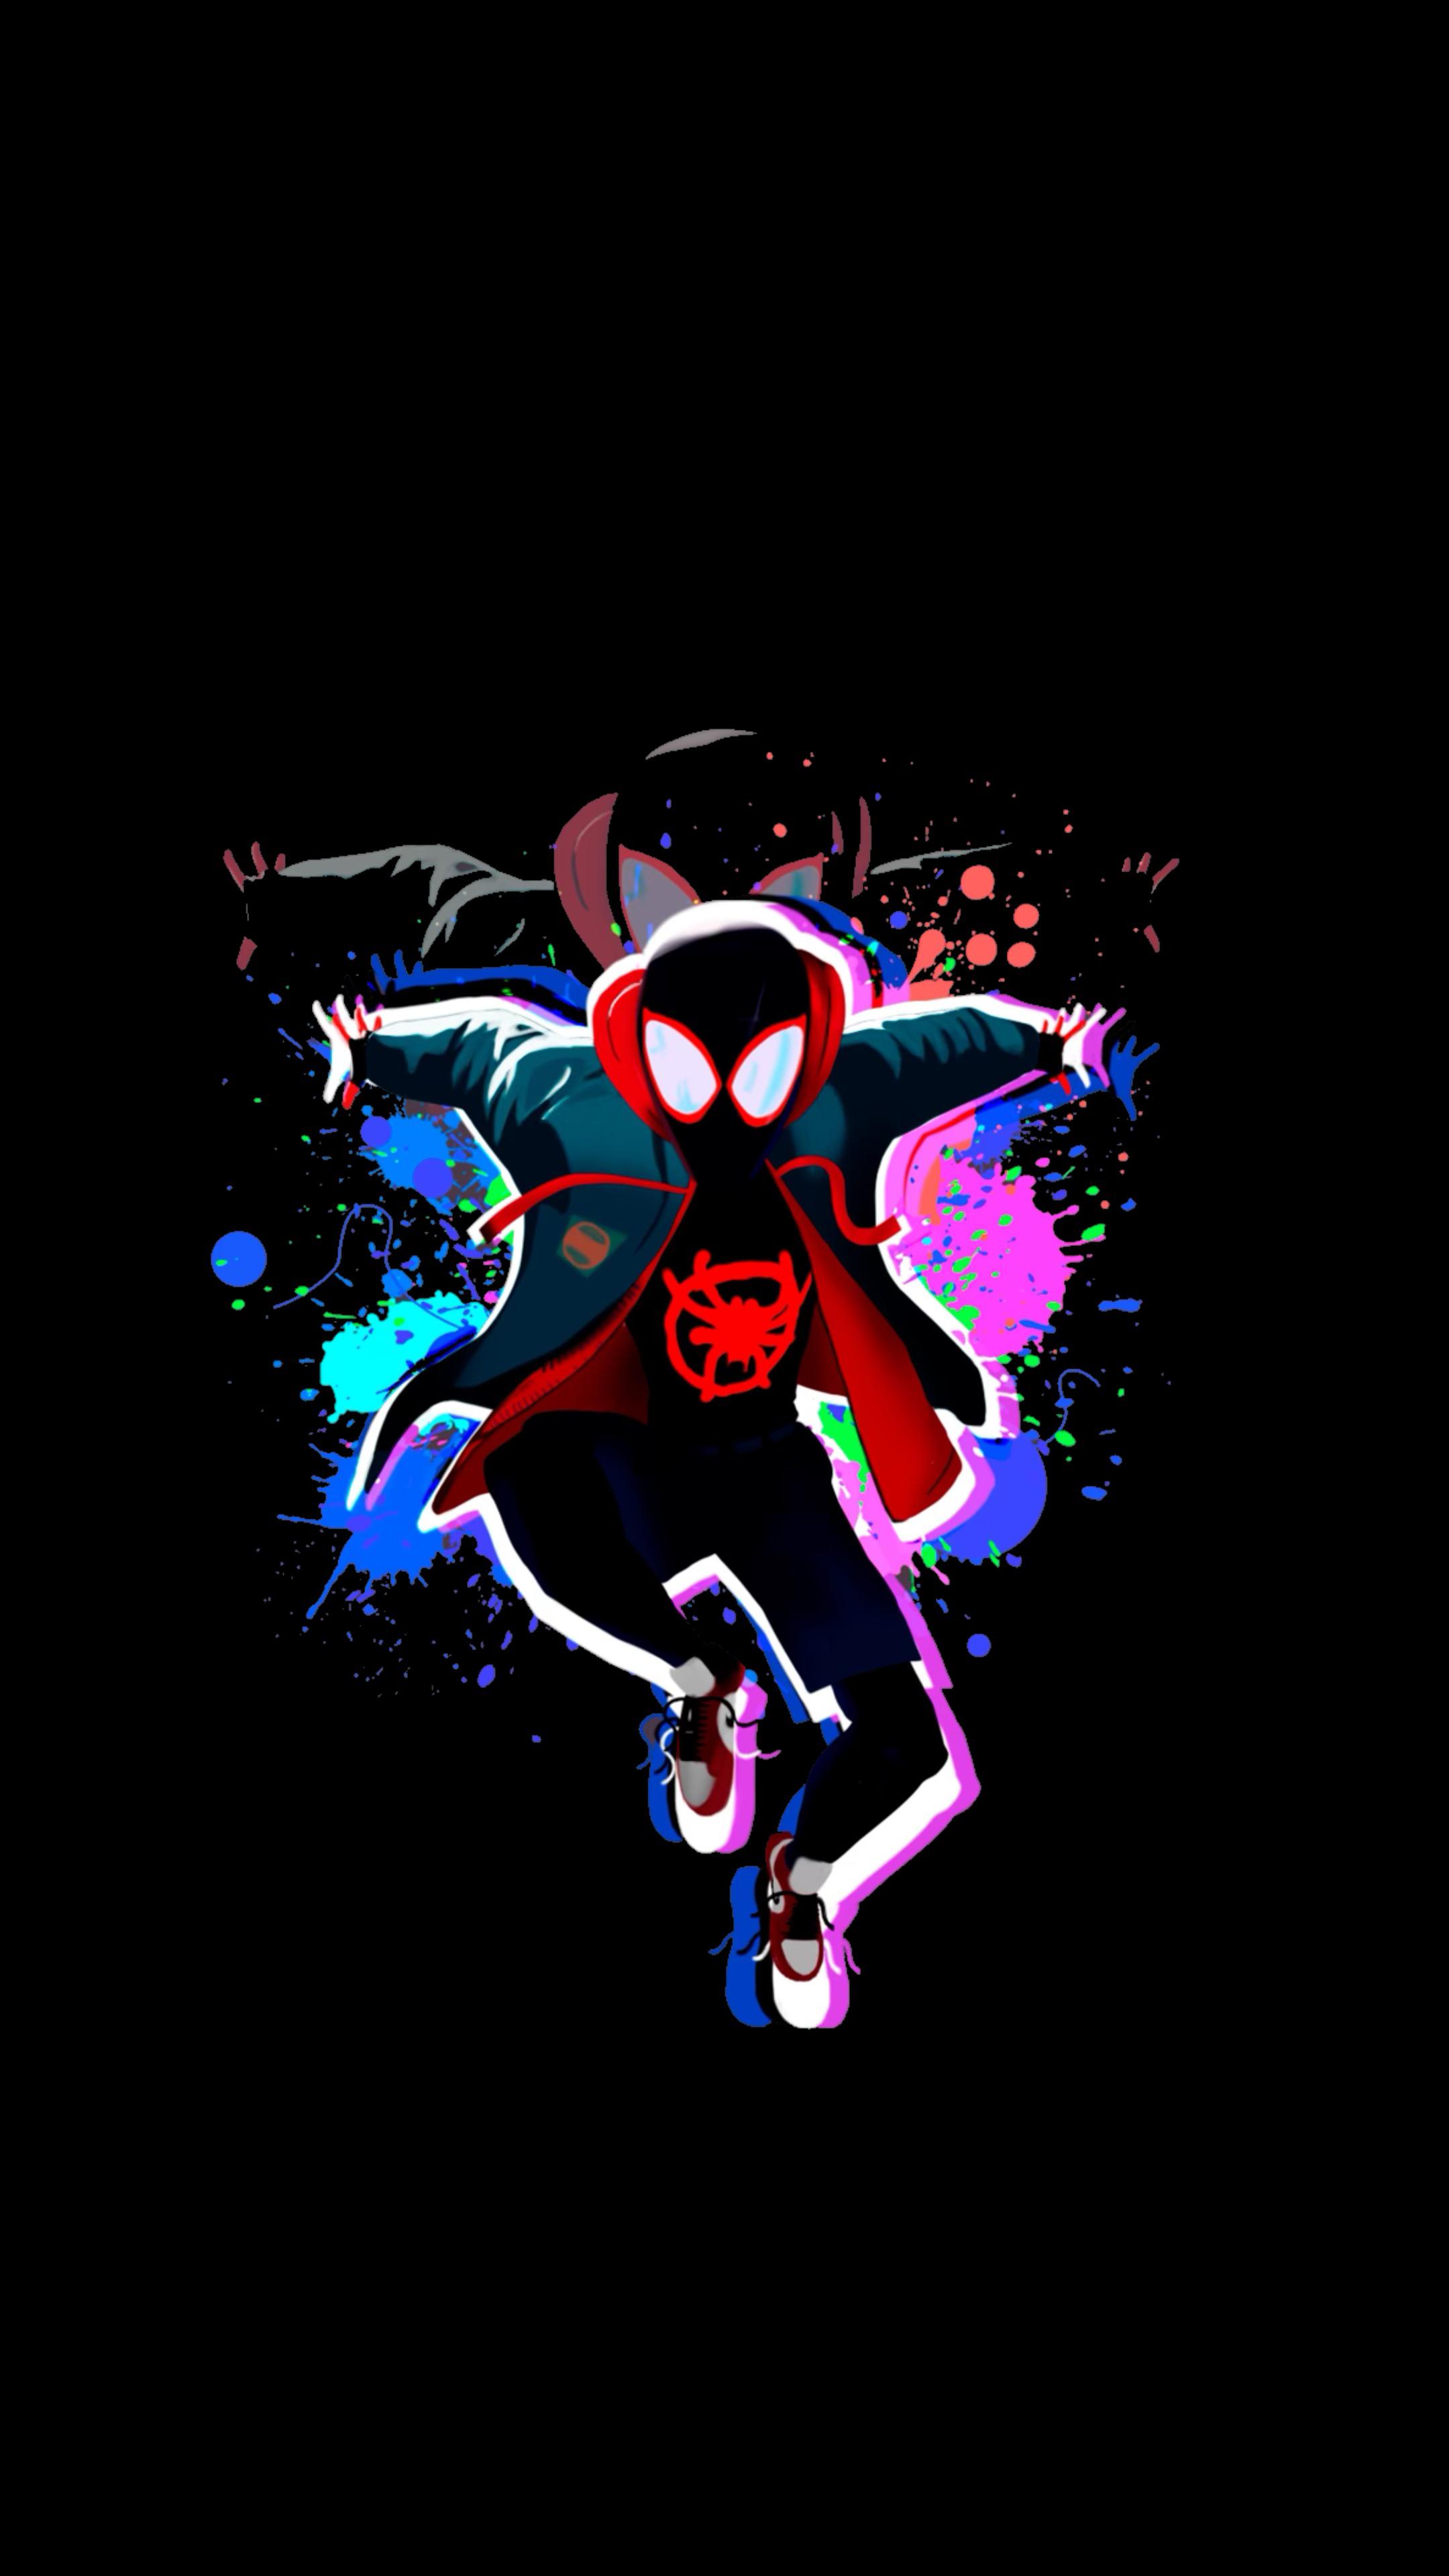 Miles Morales Wallpapers  Top 35 Best Miles Morales Backgrounds Download